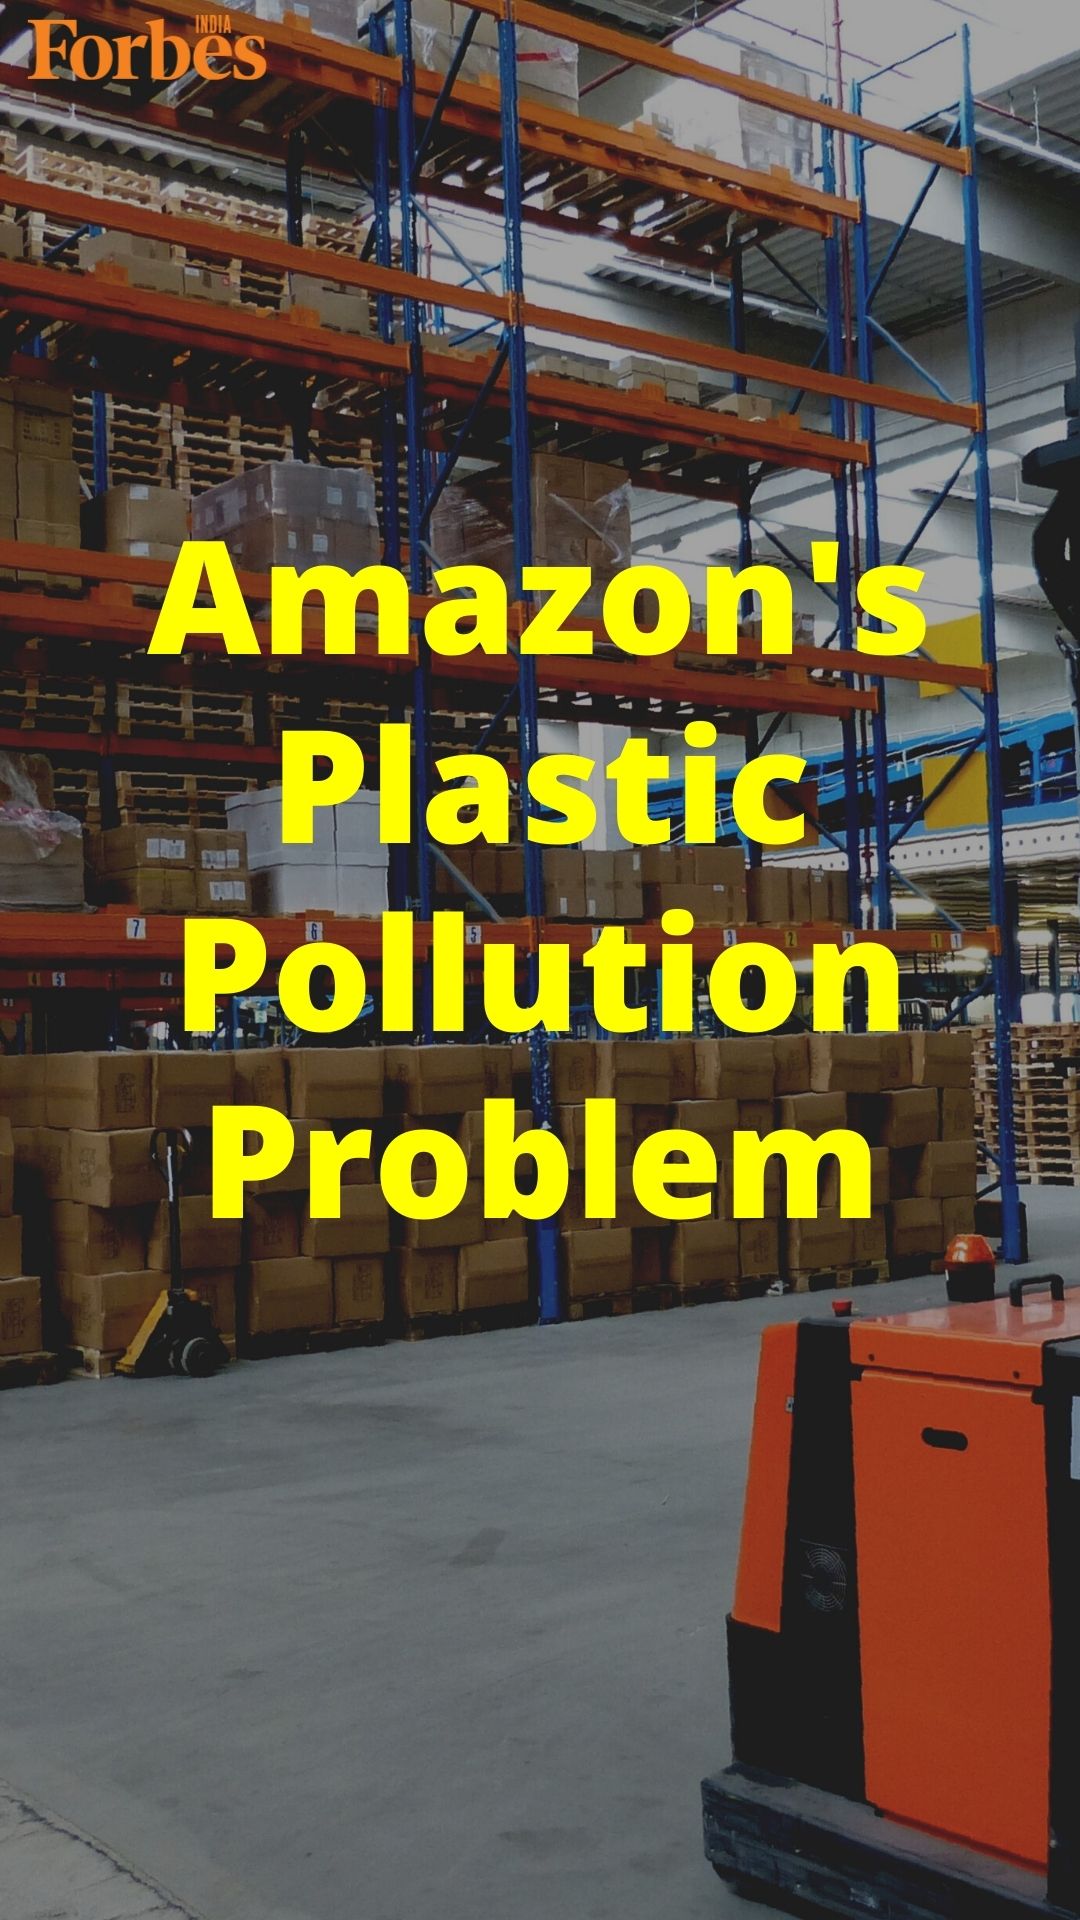 Amazon's plastic packaging waste can circle the Earth 500 times, study finds